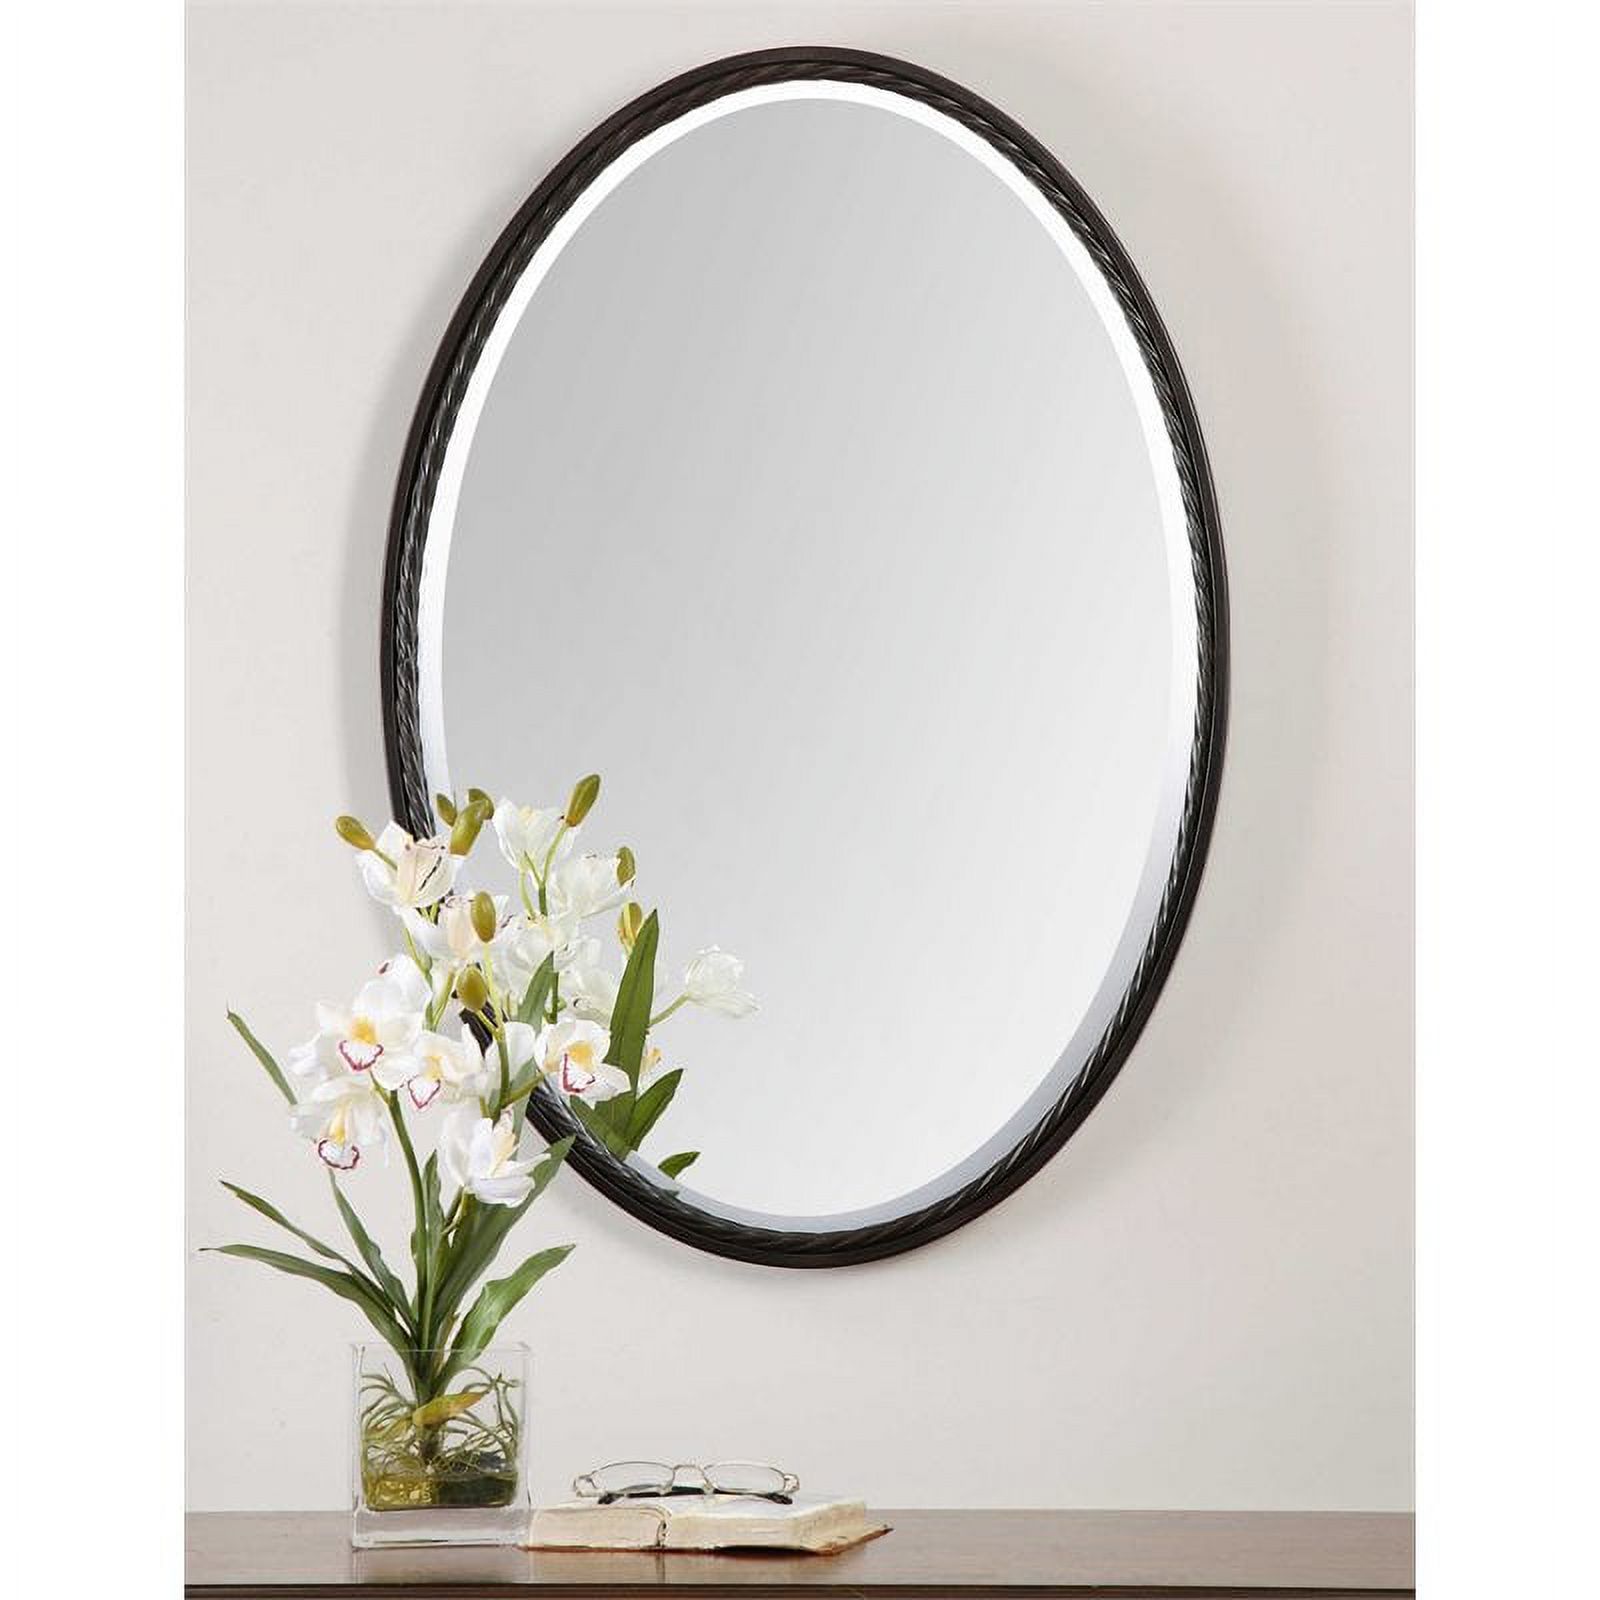 Beaumont Lane Twisted Rope Metal Oval Wall Mirror in Oil Rubbed Bronze 